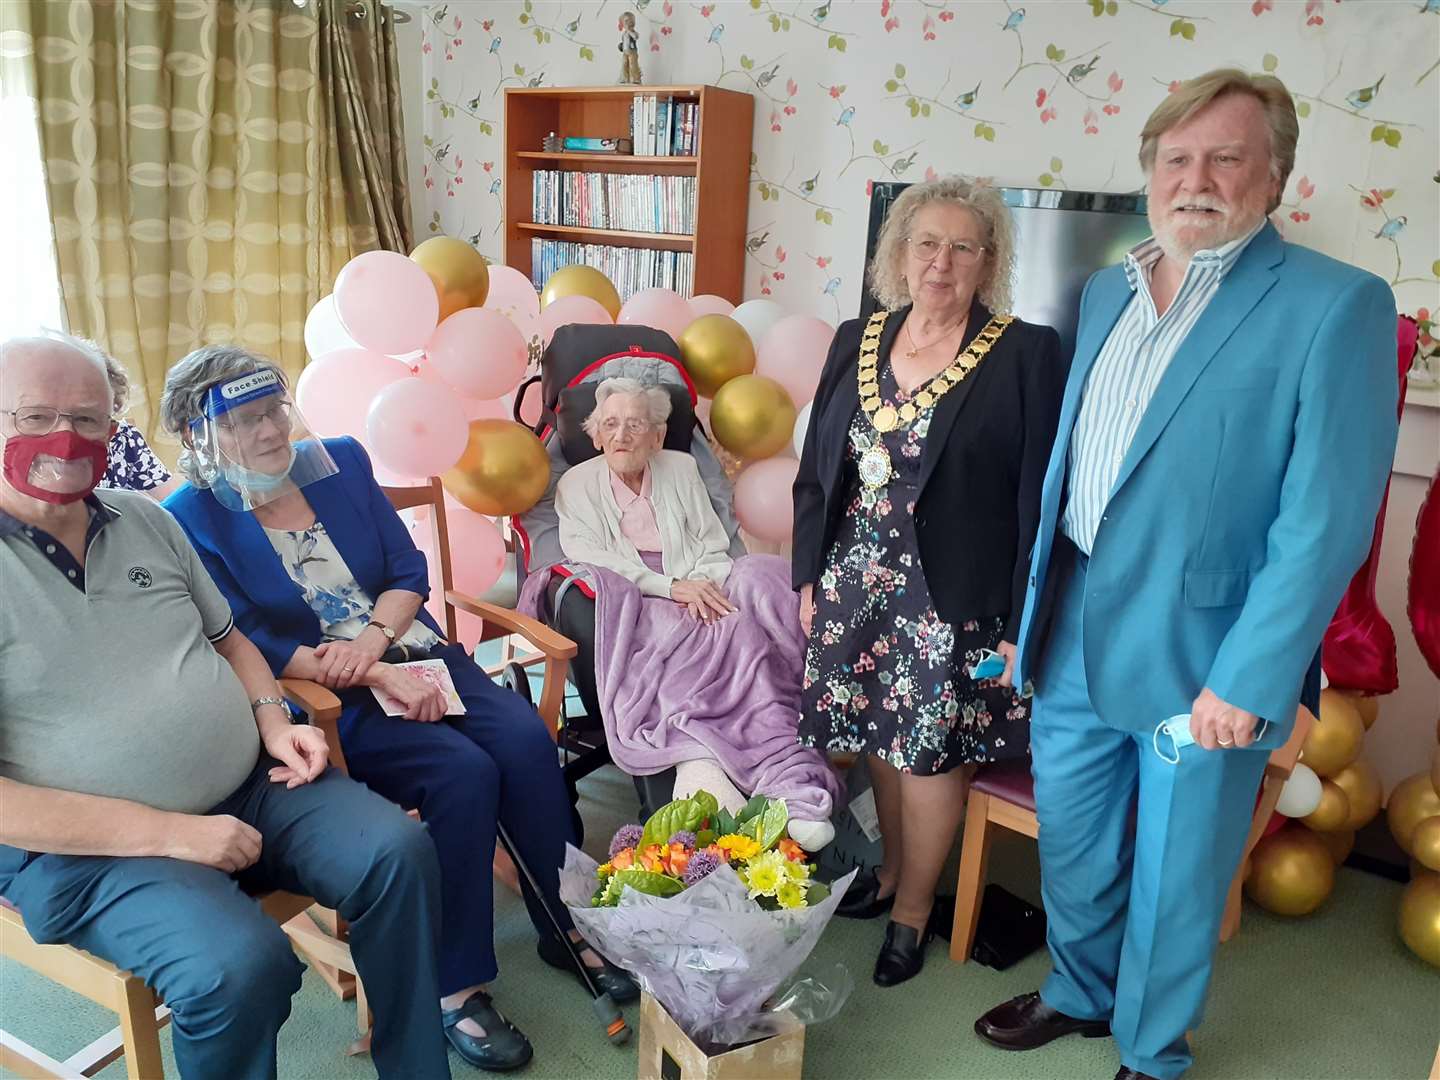 Pat Everett celebrated her 100th birthday last month at Beechcare Nursing Home in Darenth